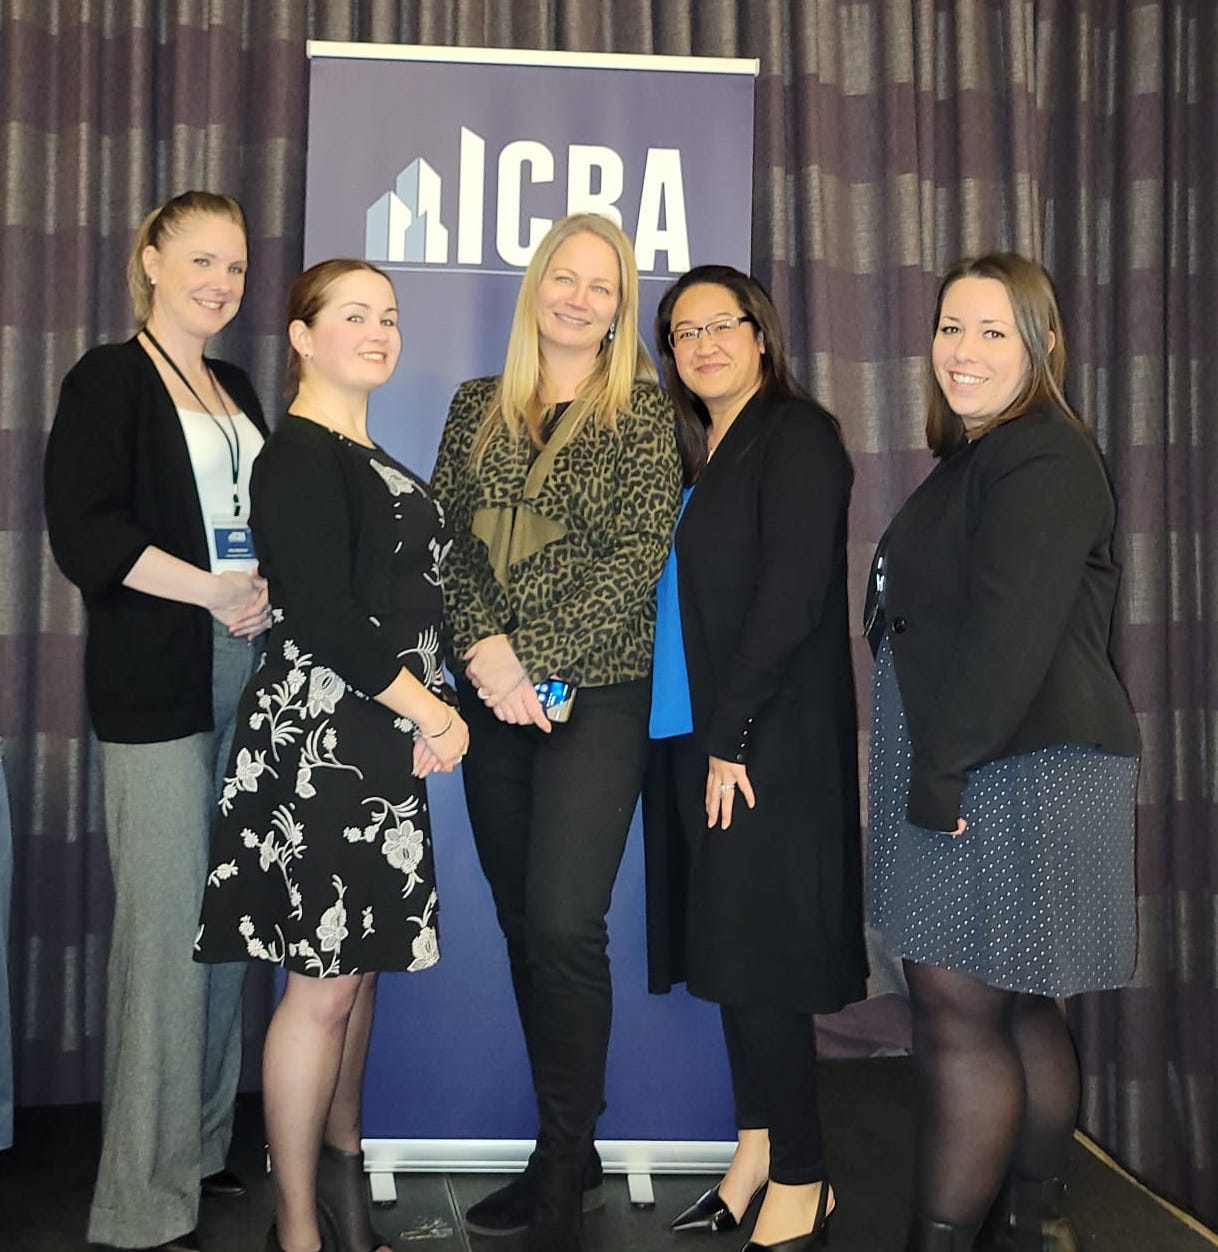 ICBA NEWS: Celebrating Our Newest Journeypeople